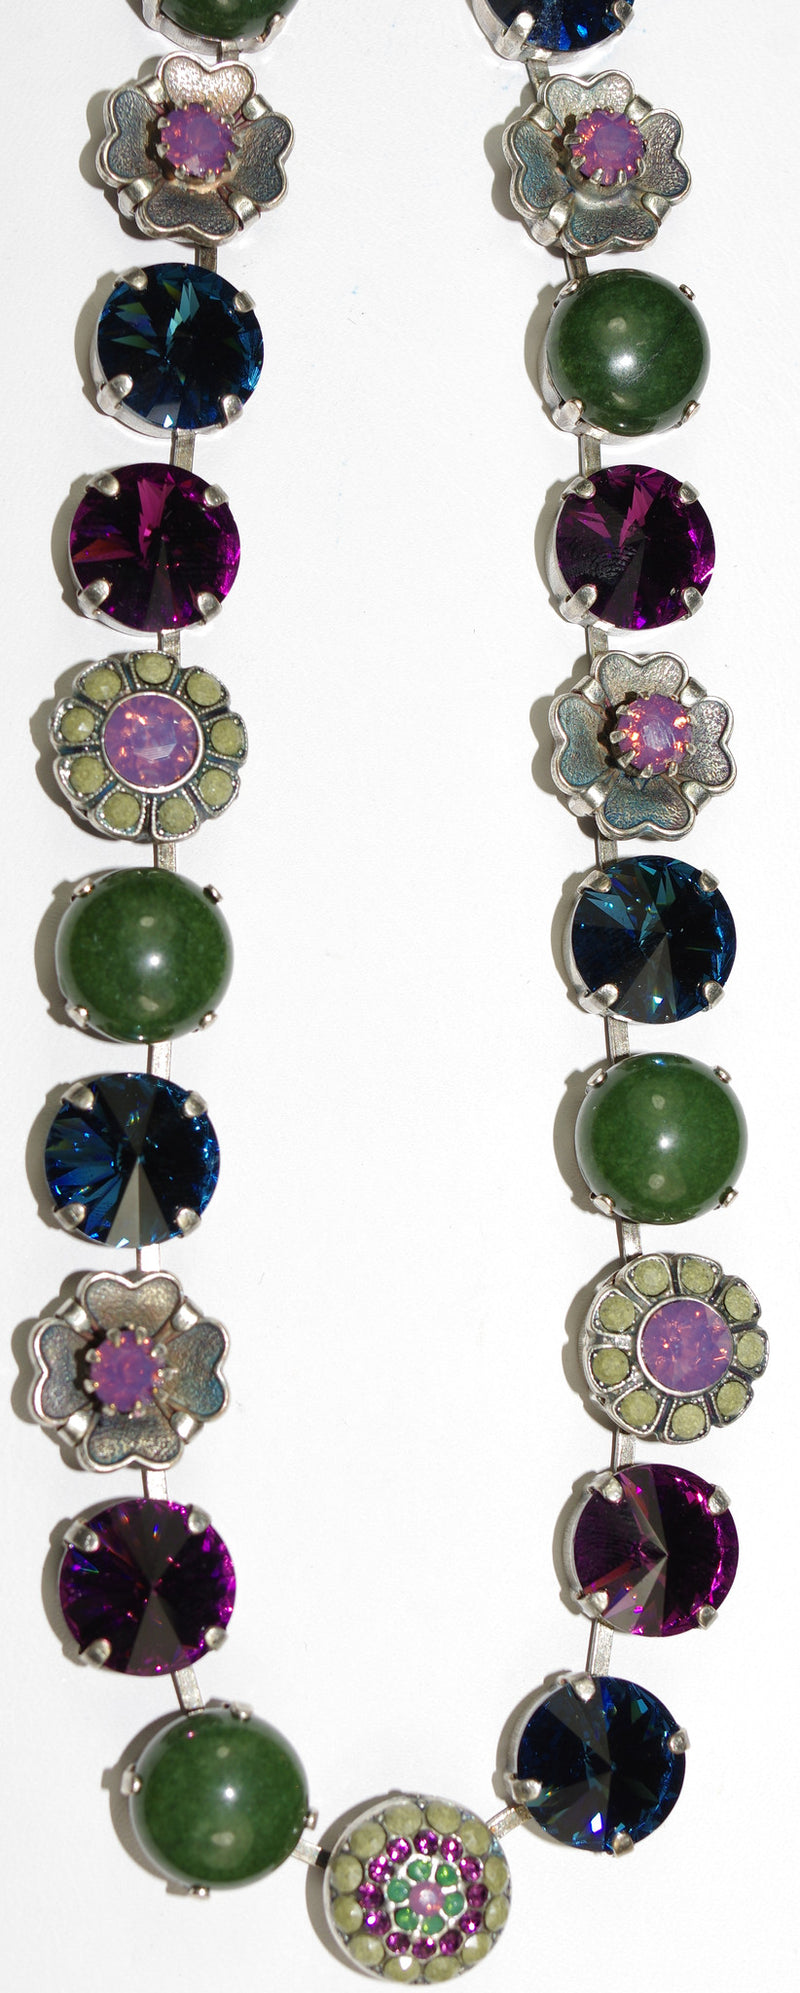 MARIANA NECKLACE PATIENCE: purple, green, blue, grey stones in silver setting, 18" adjustable chain